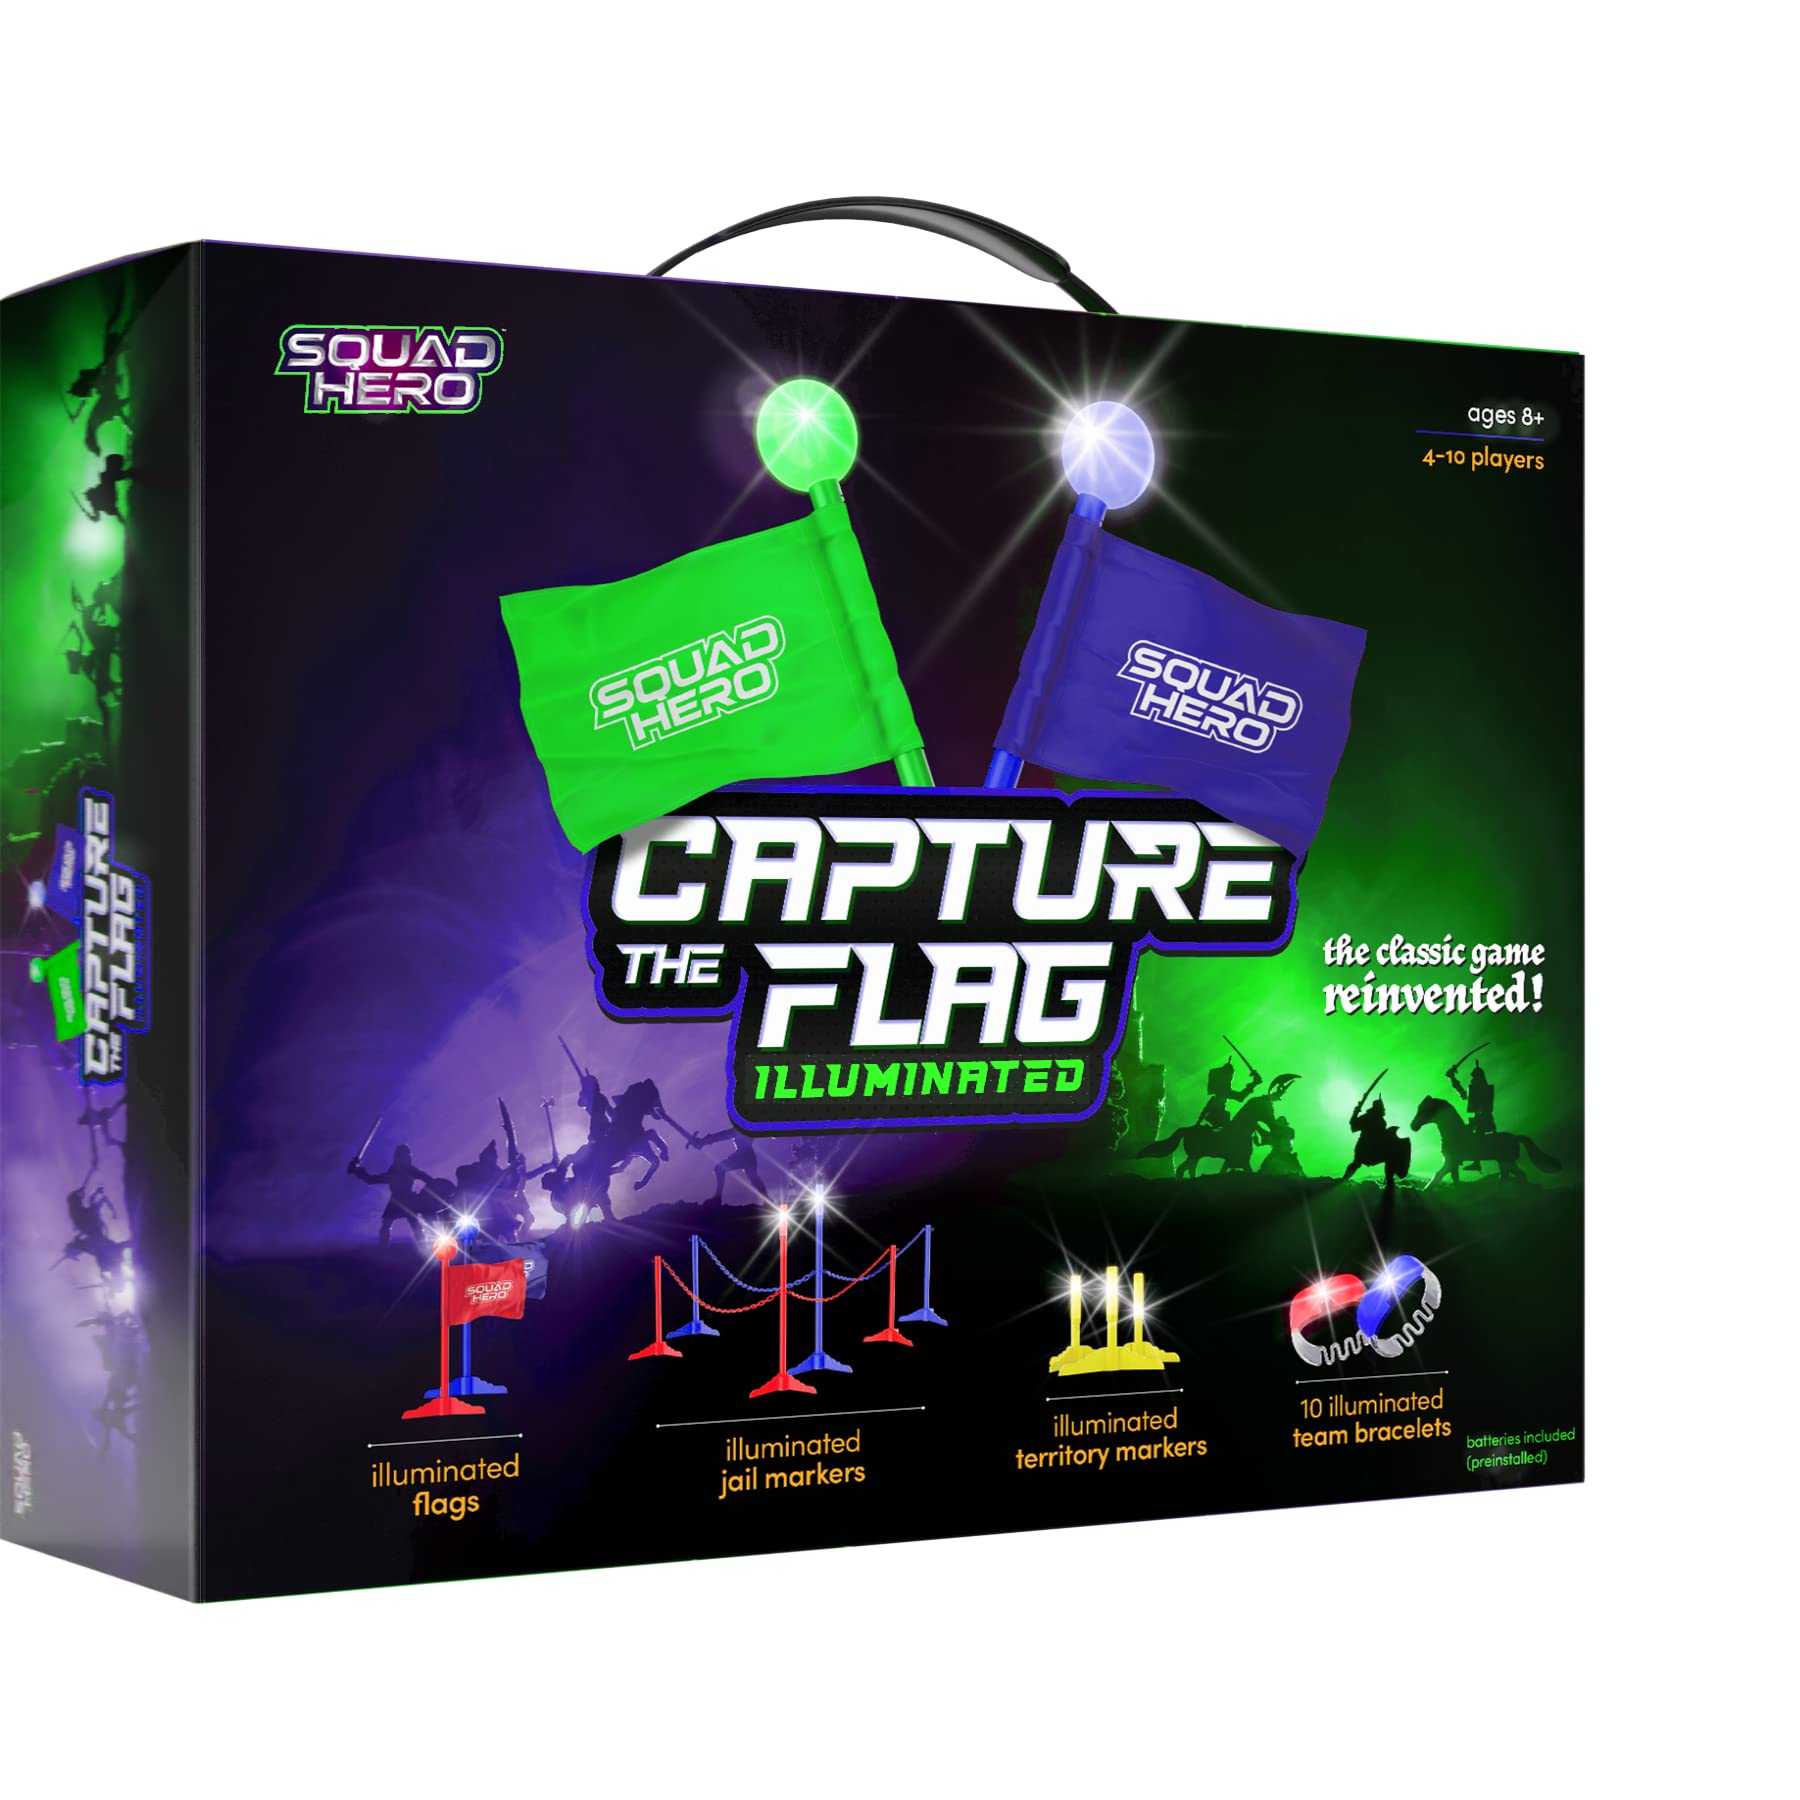 Capture The Flag Game Illuminated - Outdoor Activity for Teen Boys and  Girls Parties- Fun Sports Gift Idea for Kids & Adults of All Ages - Cool  for